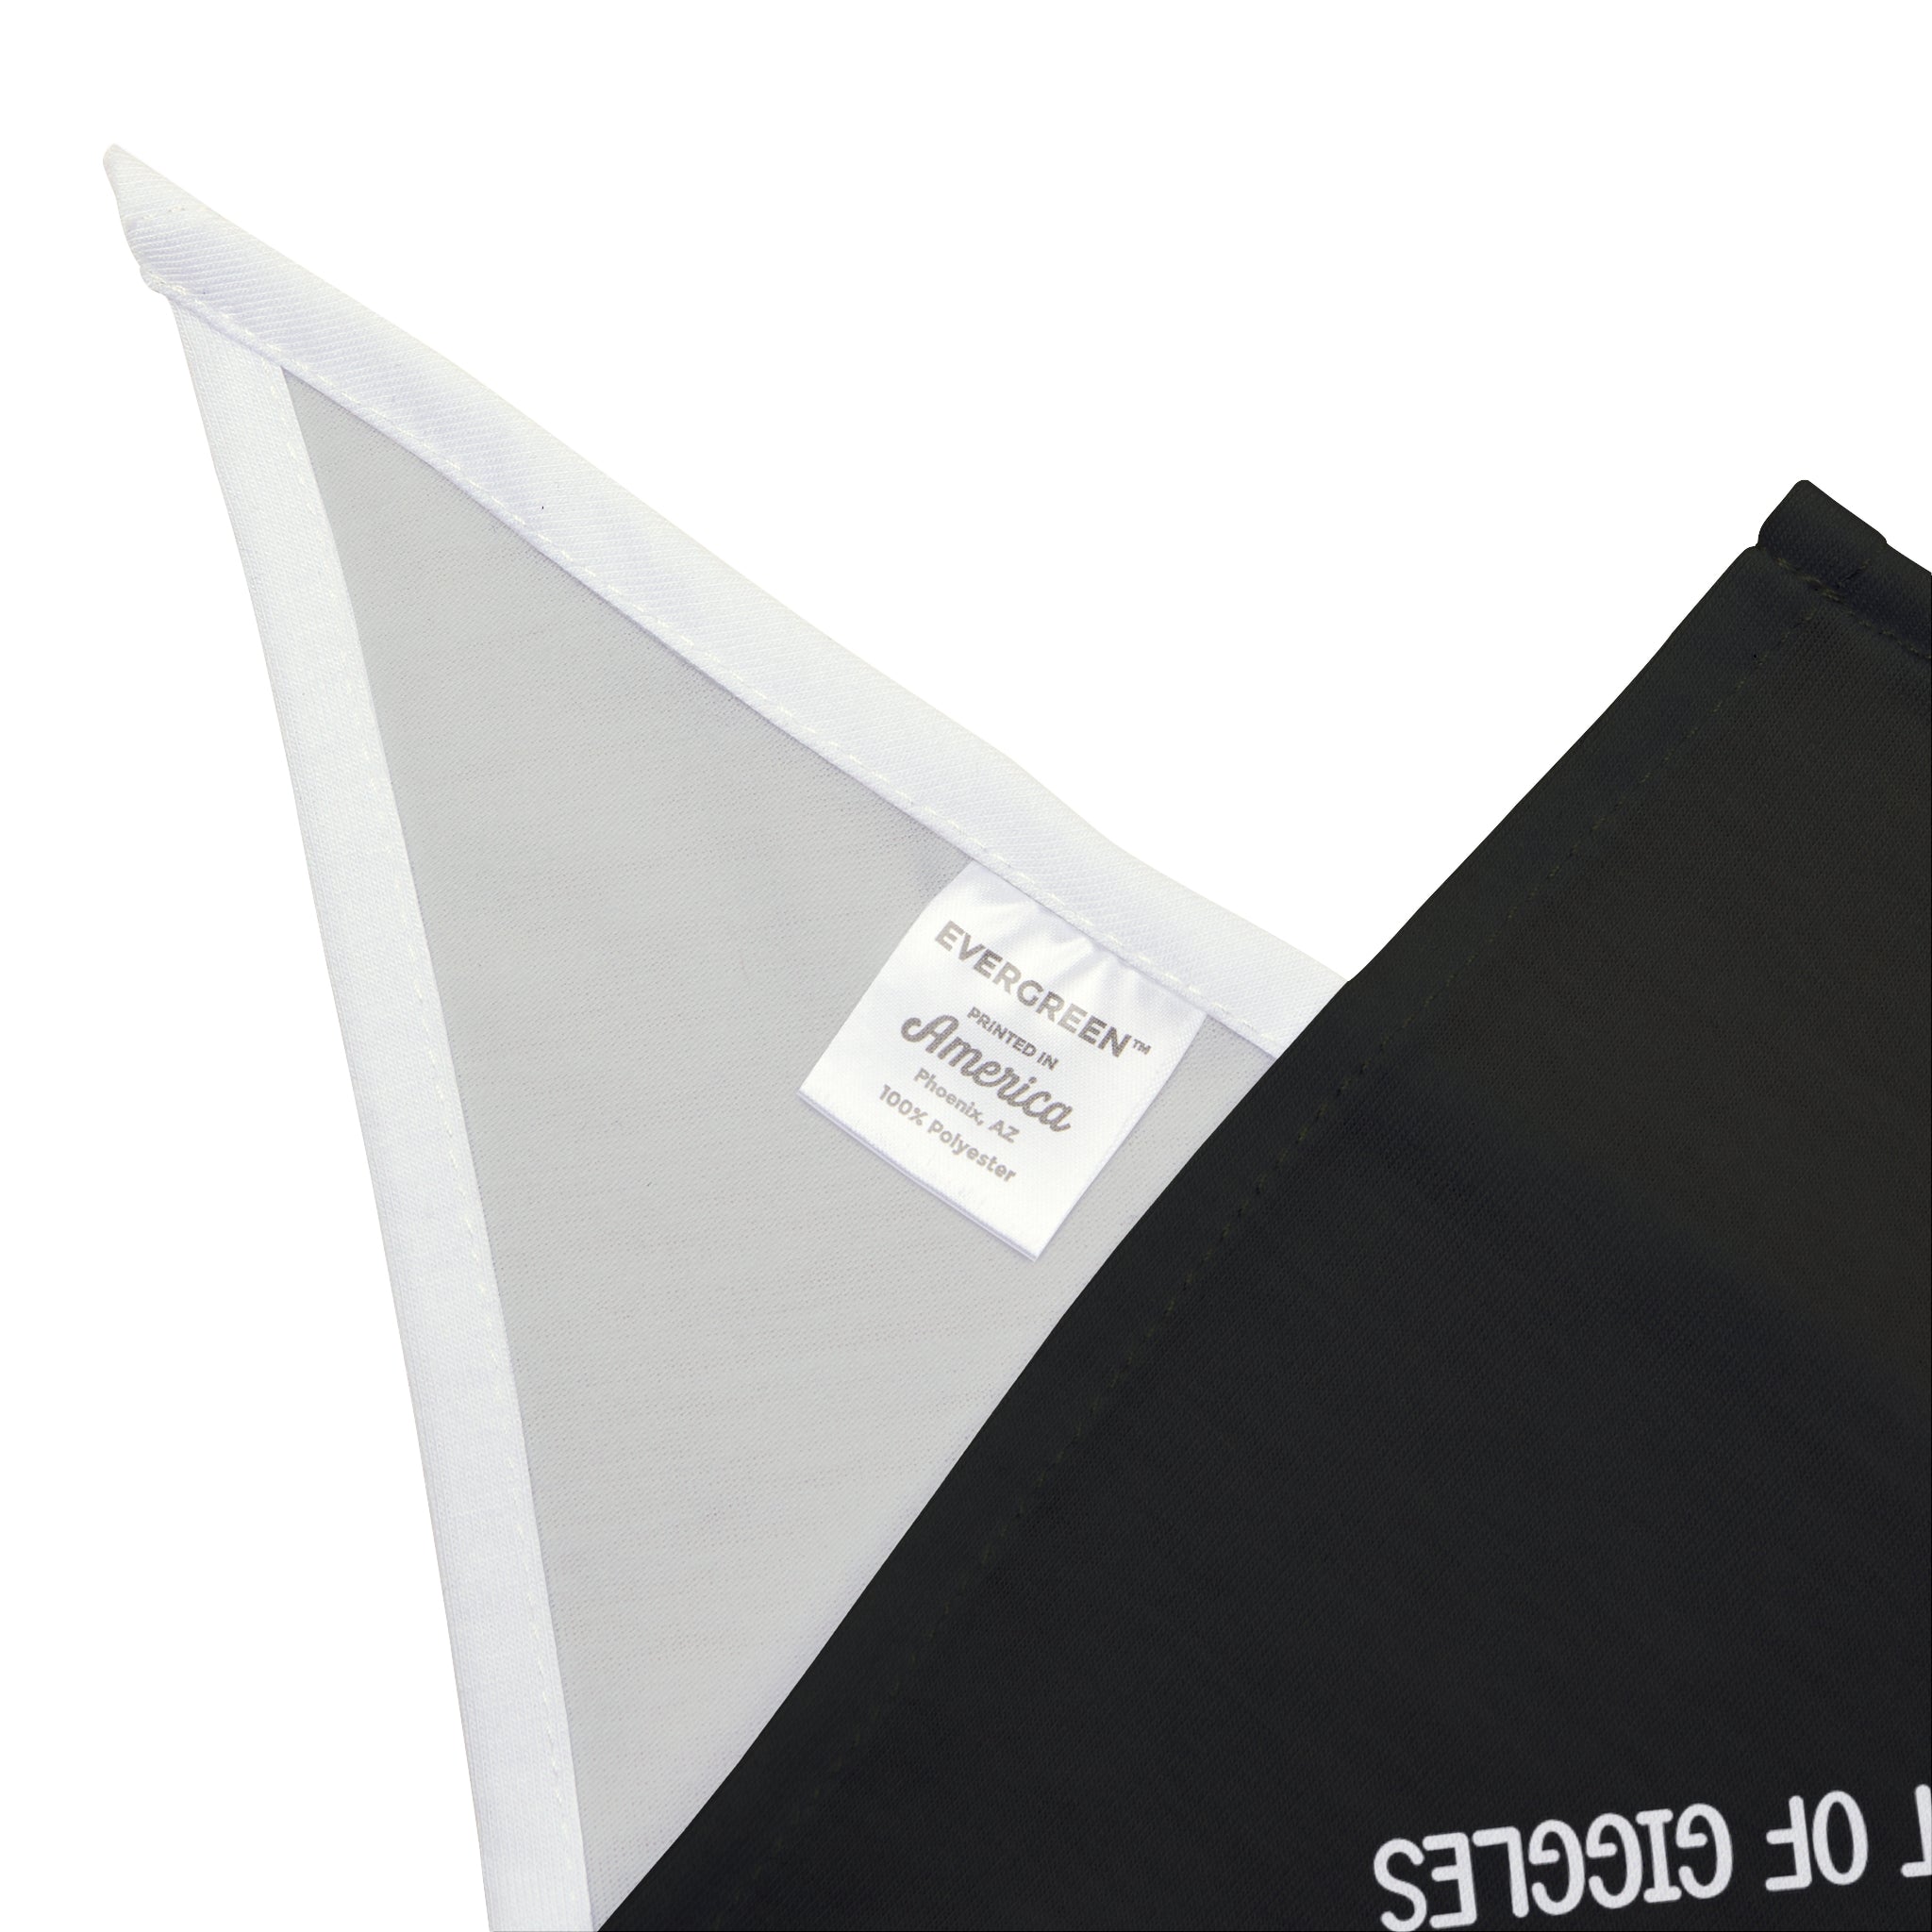 Close-up of a fabric label reading "EVERGREEN America 100% polyester" attached to the corner of a black and white triangular piece of fabric, showcasing the He-He - Pet Bandana made with soft-spun polyester.